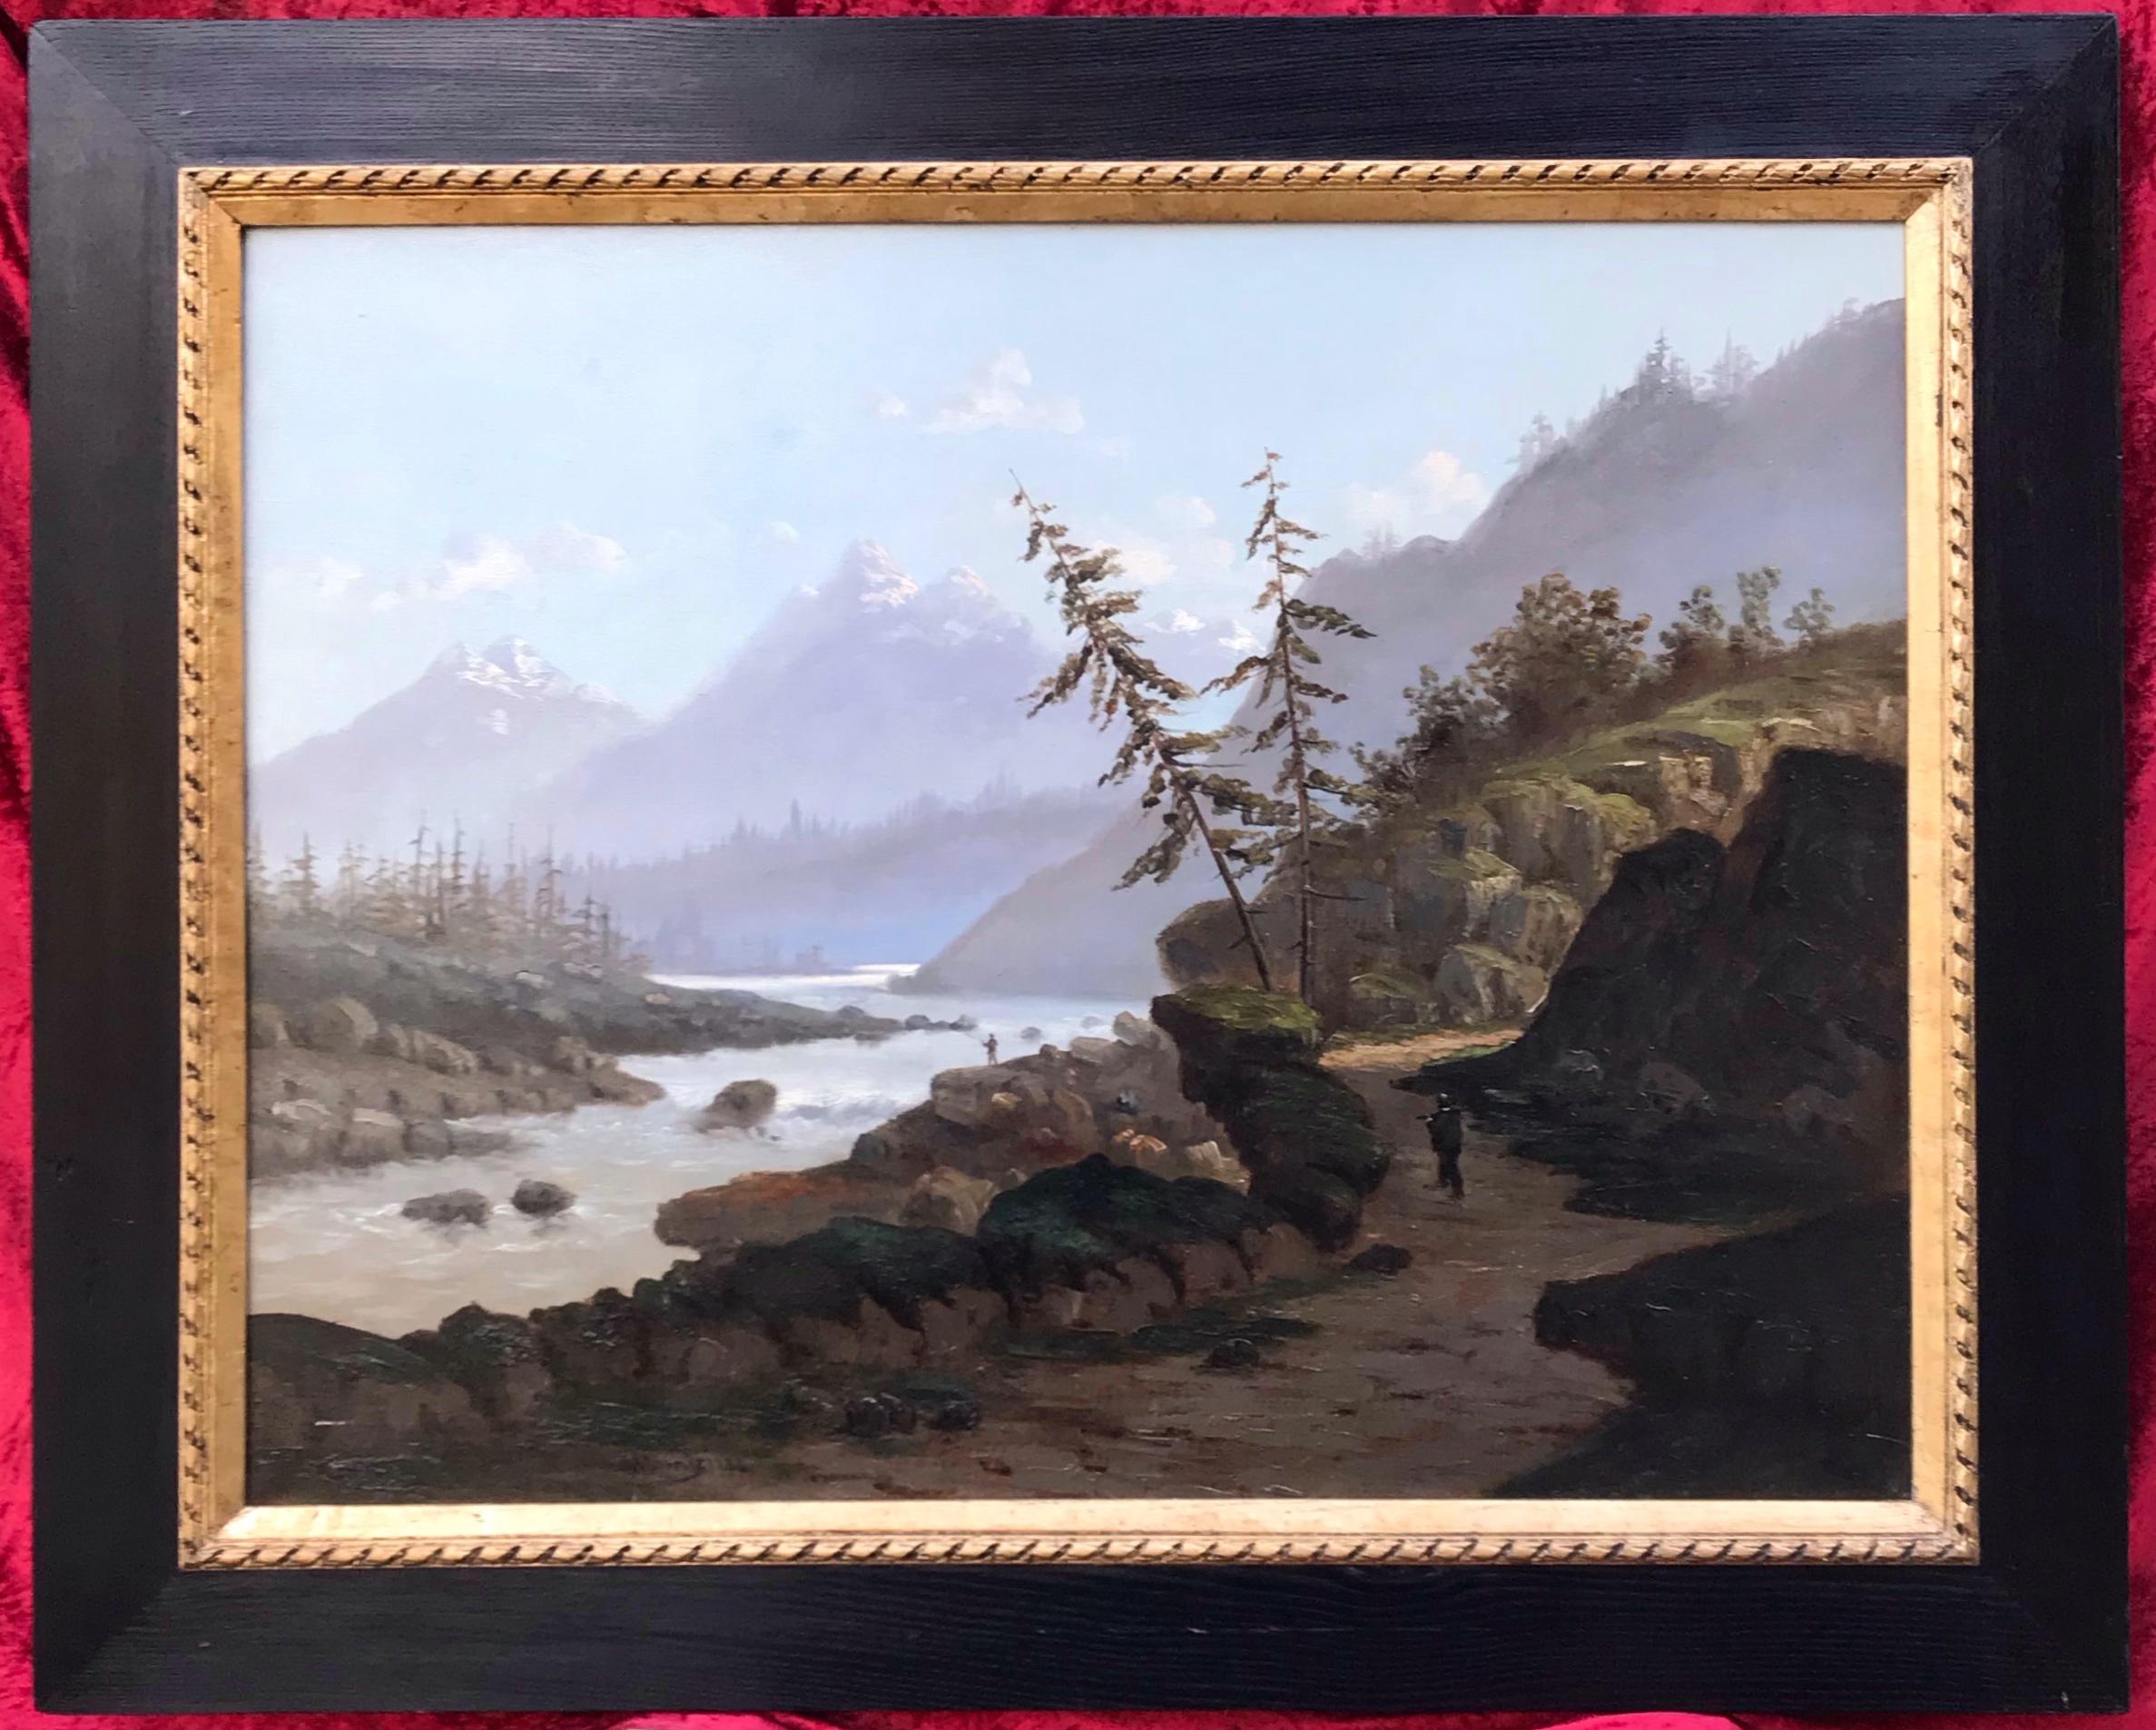 MOSNY Henry Landscape Painting - Landscape of Mountains